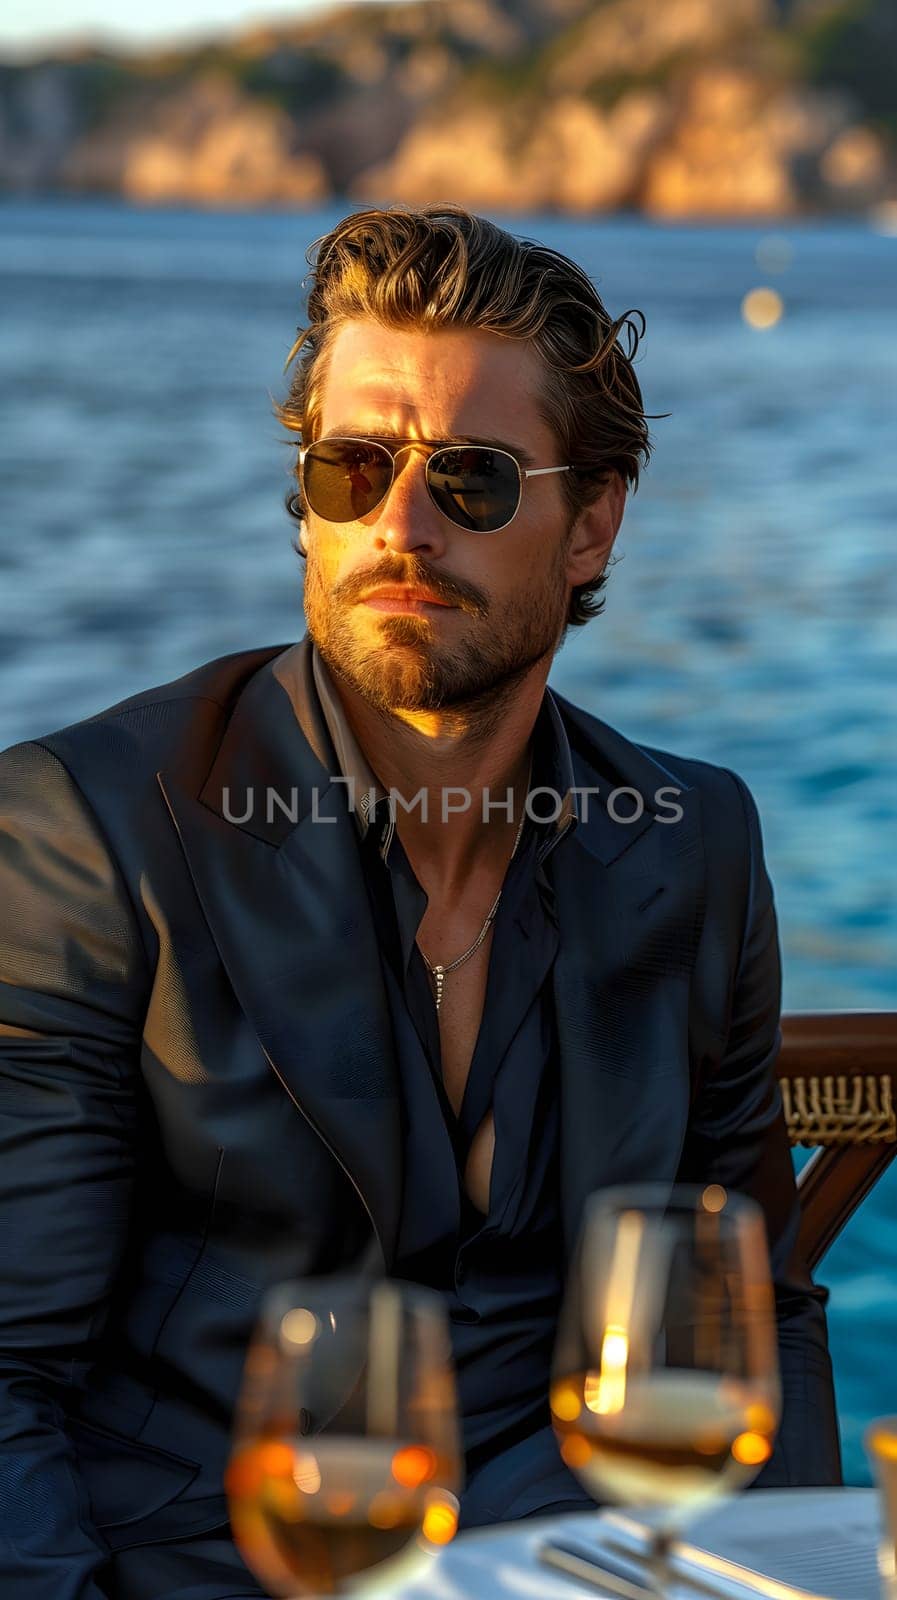 A man sporting sunglasses sits at a table with two glasses of wine. His eyewear enhances his vision, while his beard adds to his charm